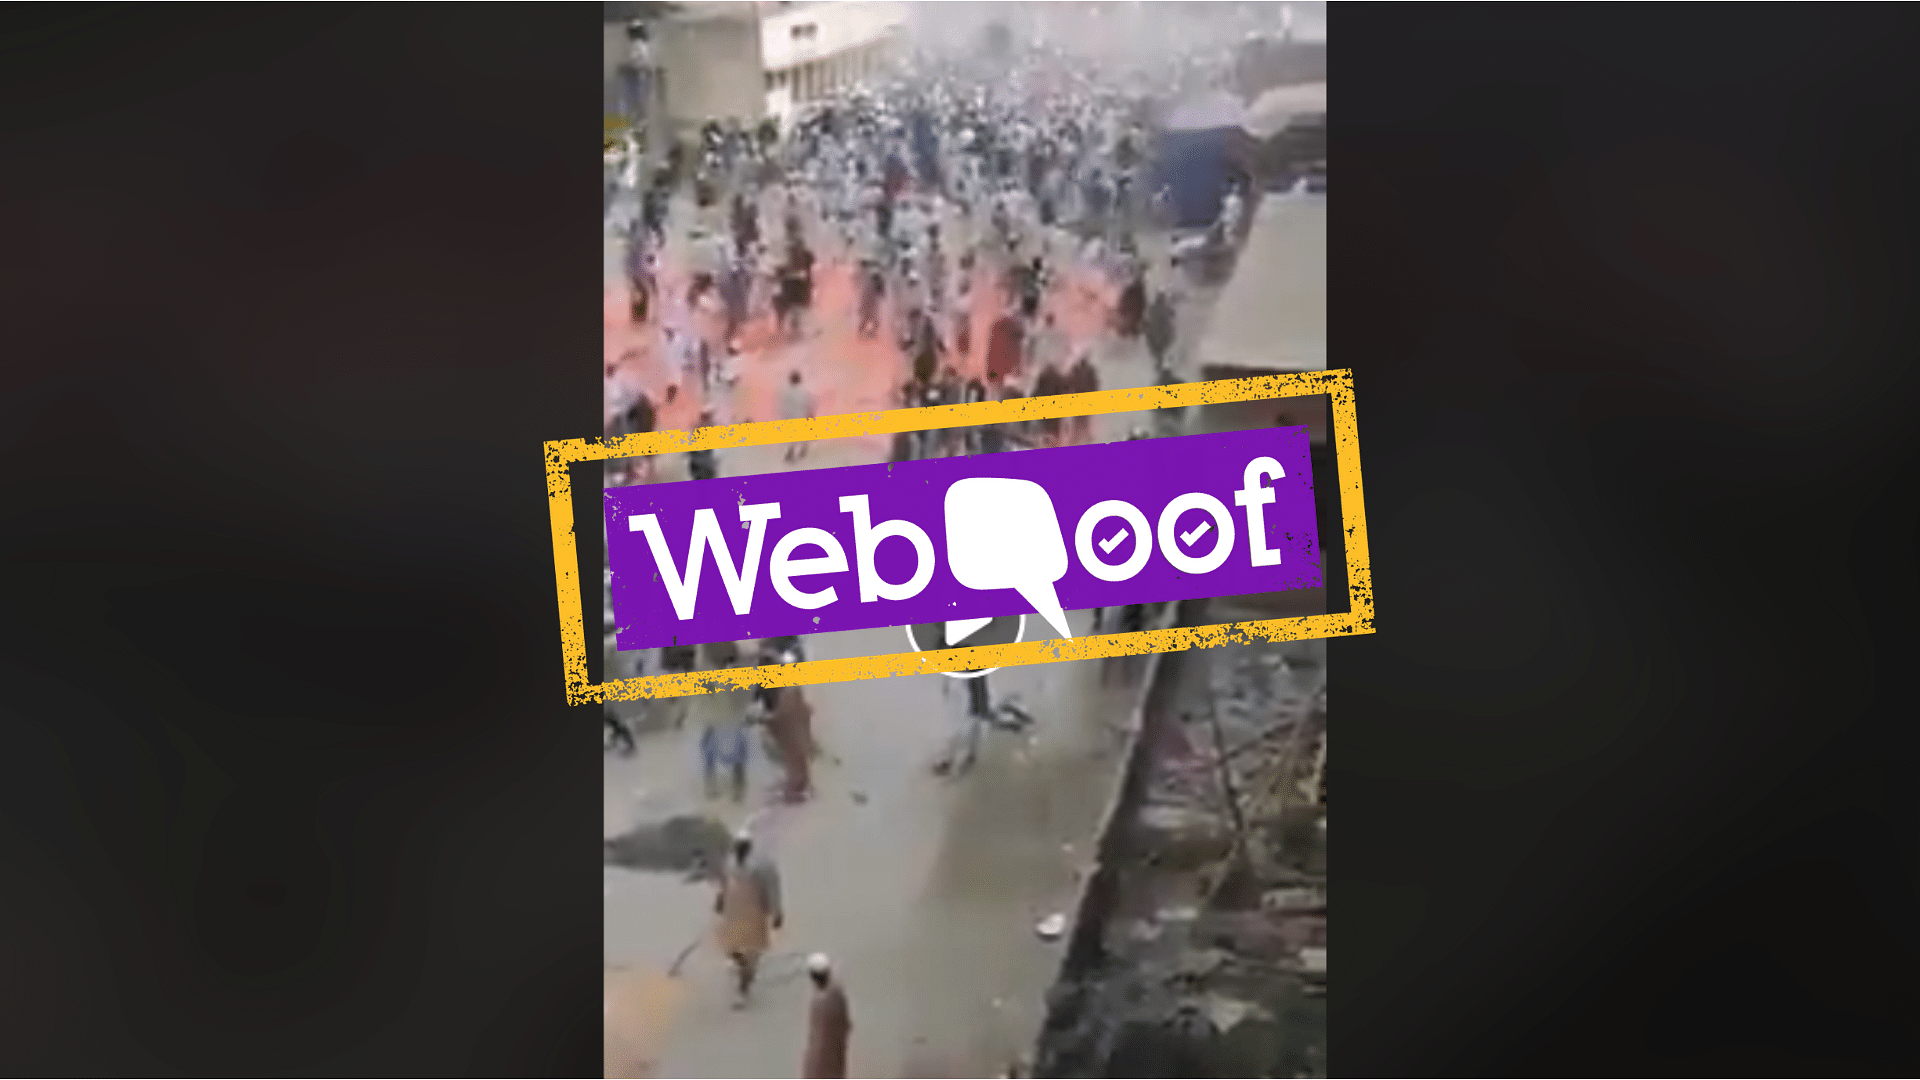 The video is from the Tongi clashes in Bangladesh, which killed at least one person and left over 200 people injured.